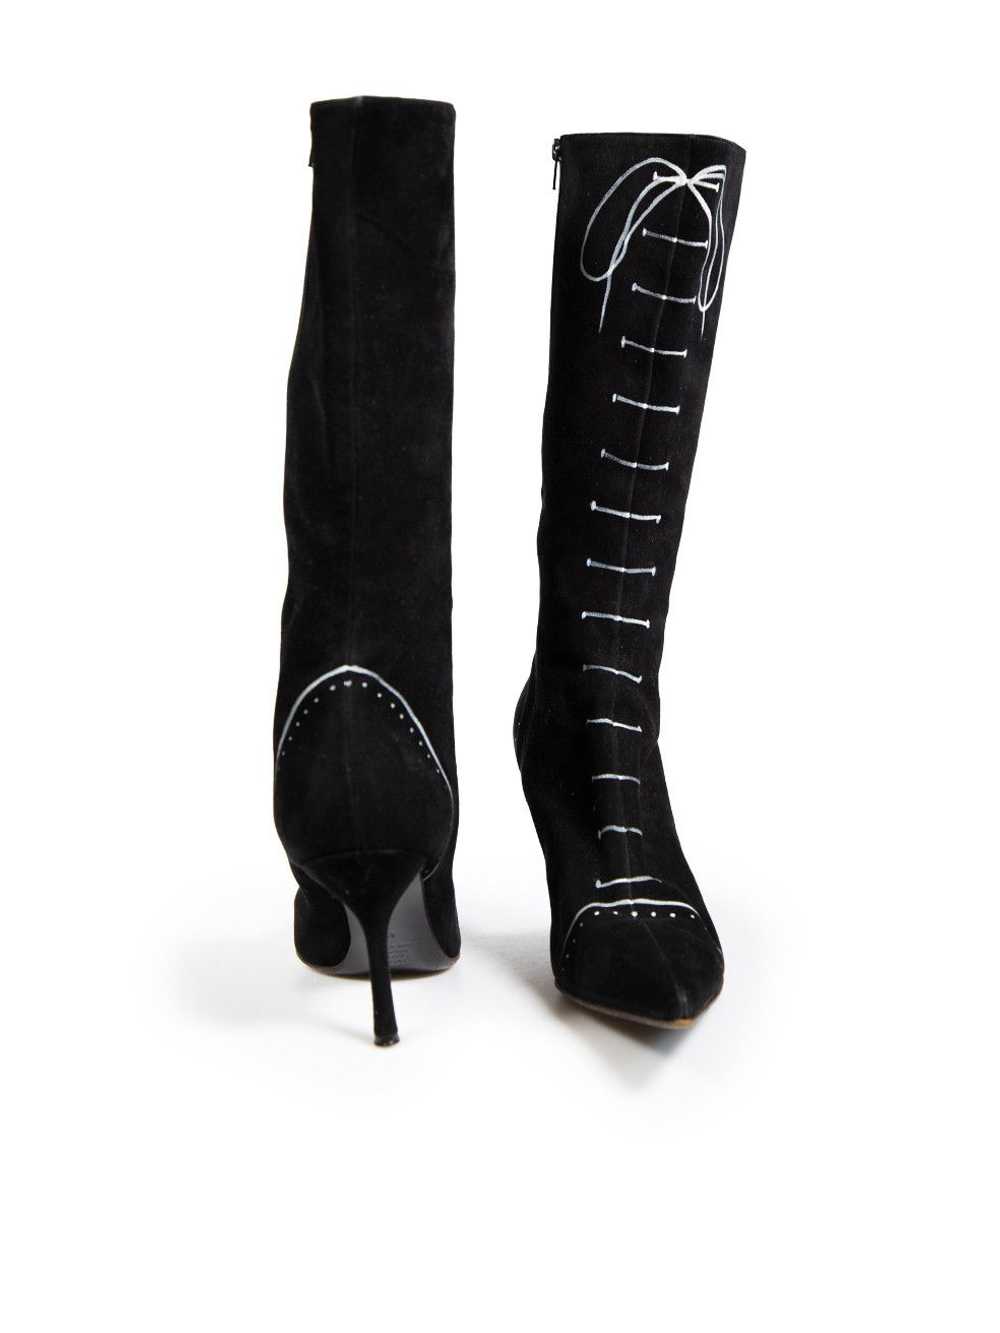 Moschino Black Suede Lace Print Boots - image 3